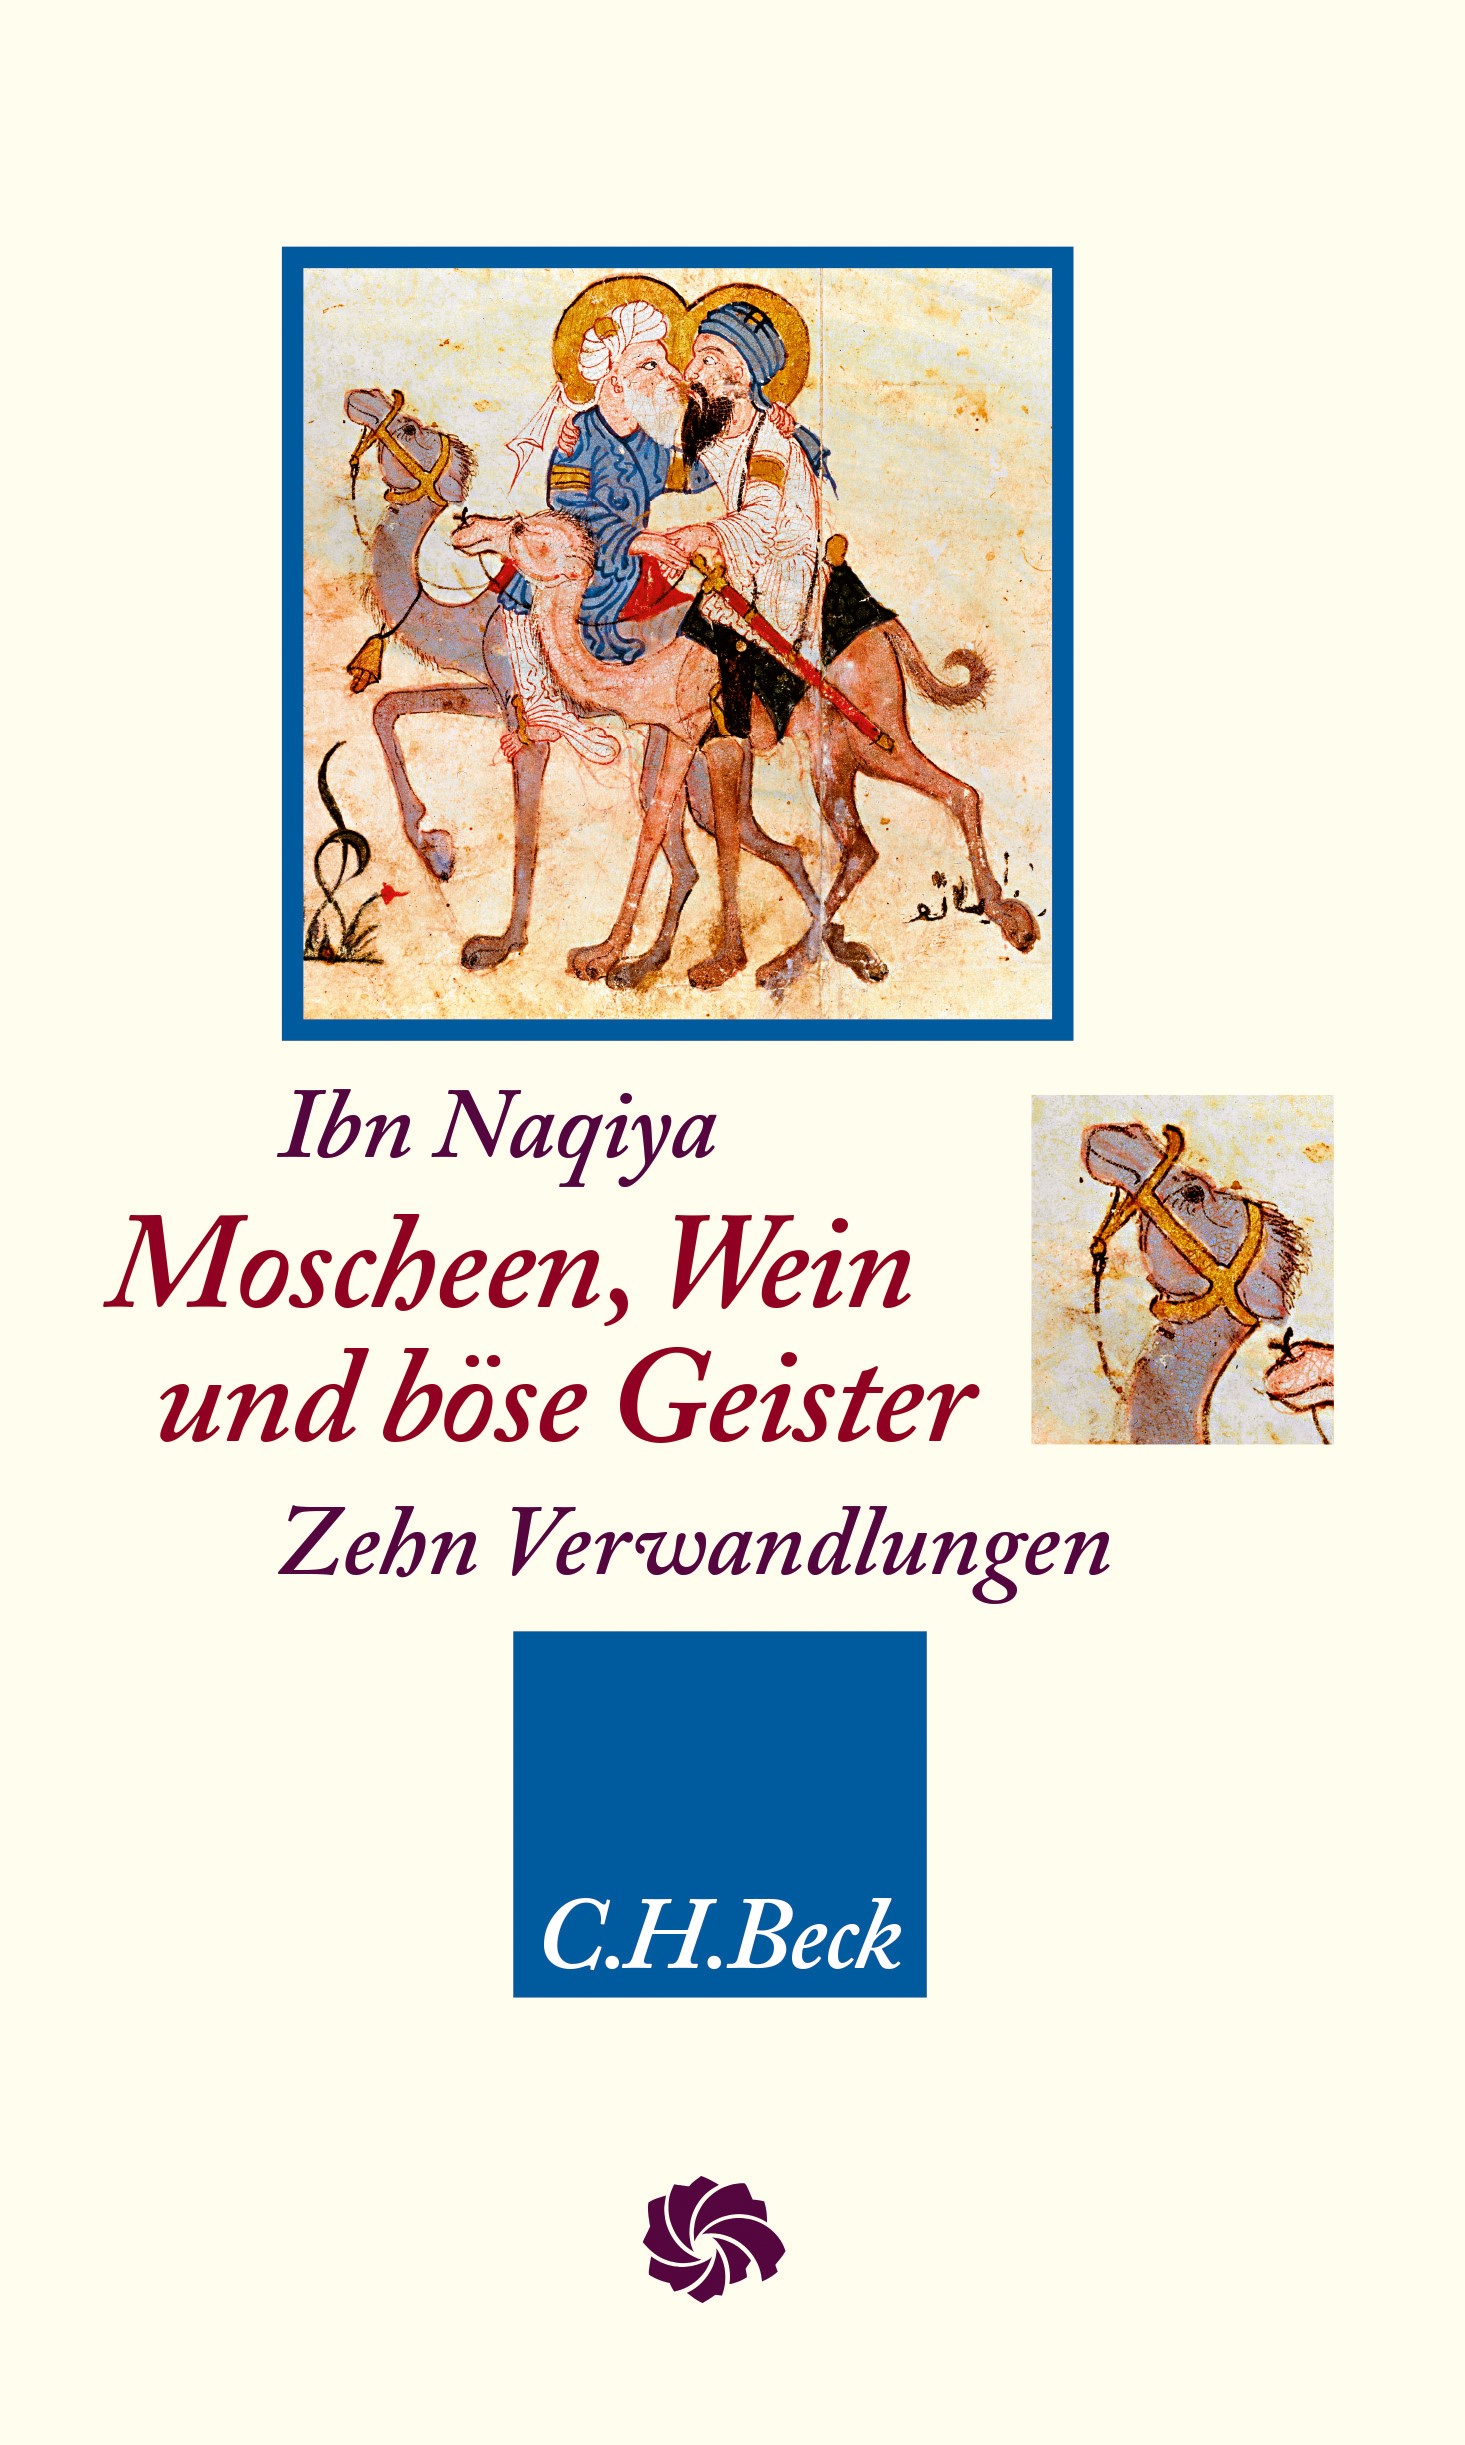 Cover of Stefan Wild's German translation of Ibn Naqiya's Ten Transformations – "Moscheen, Wein und boese Geister" (published by C.H.Beck)